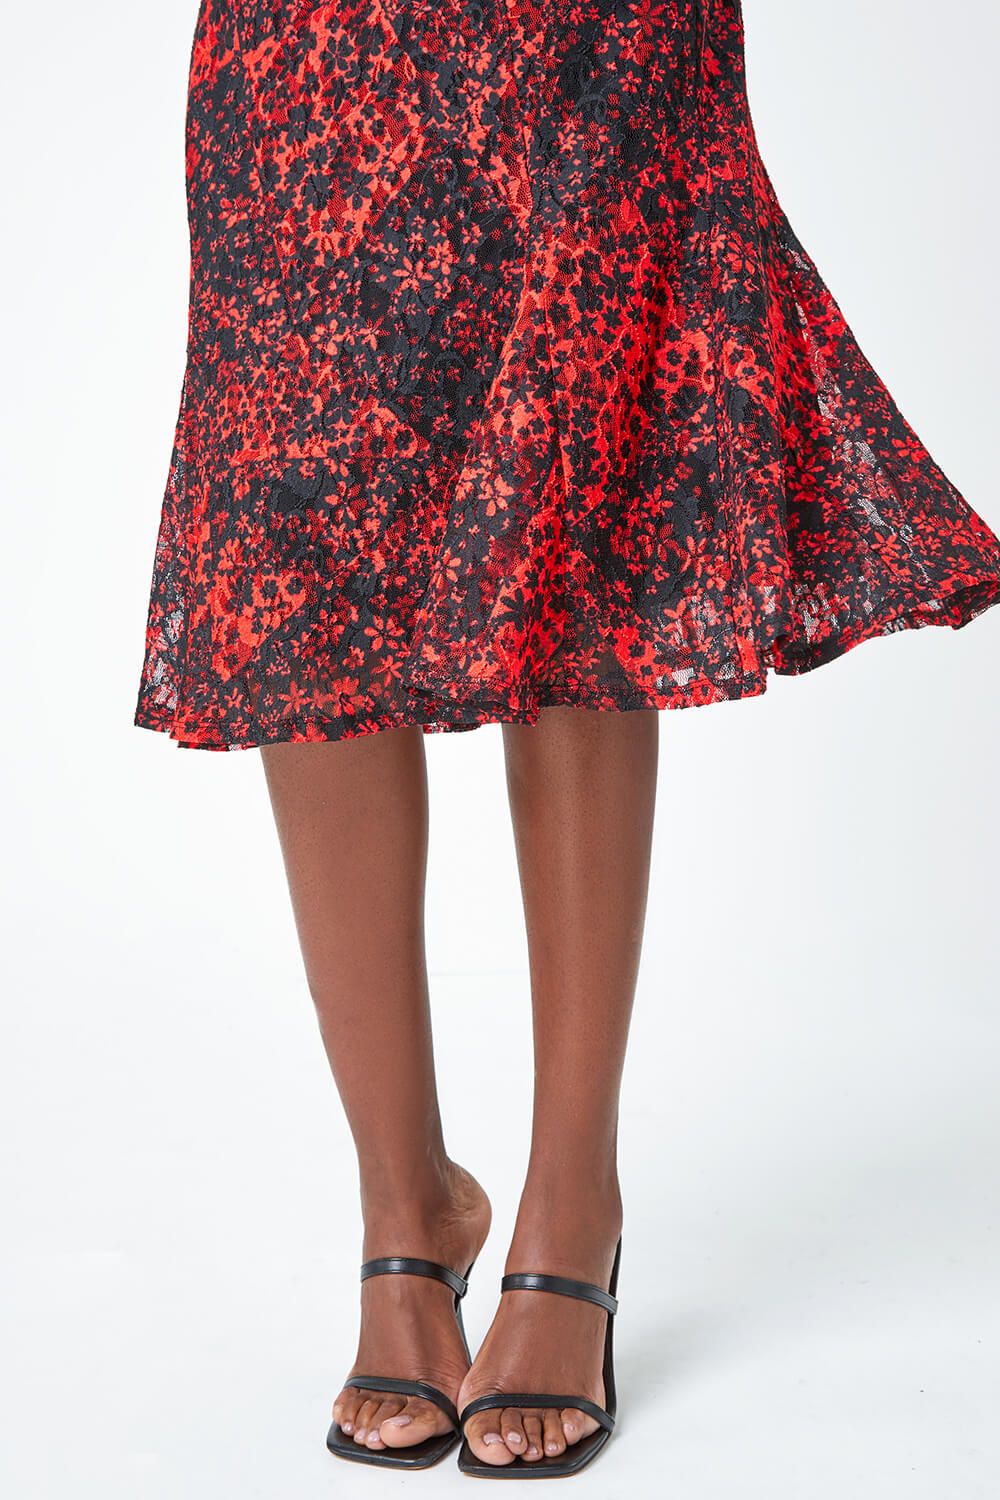 Red Ditsy Floral Stretch Lace Dress, Image 5 of 5